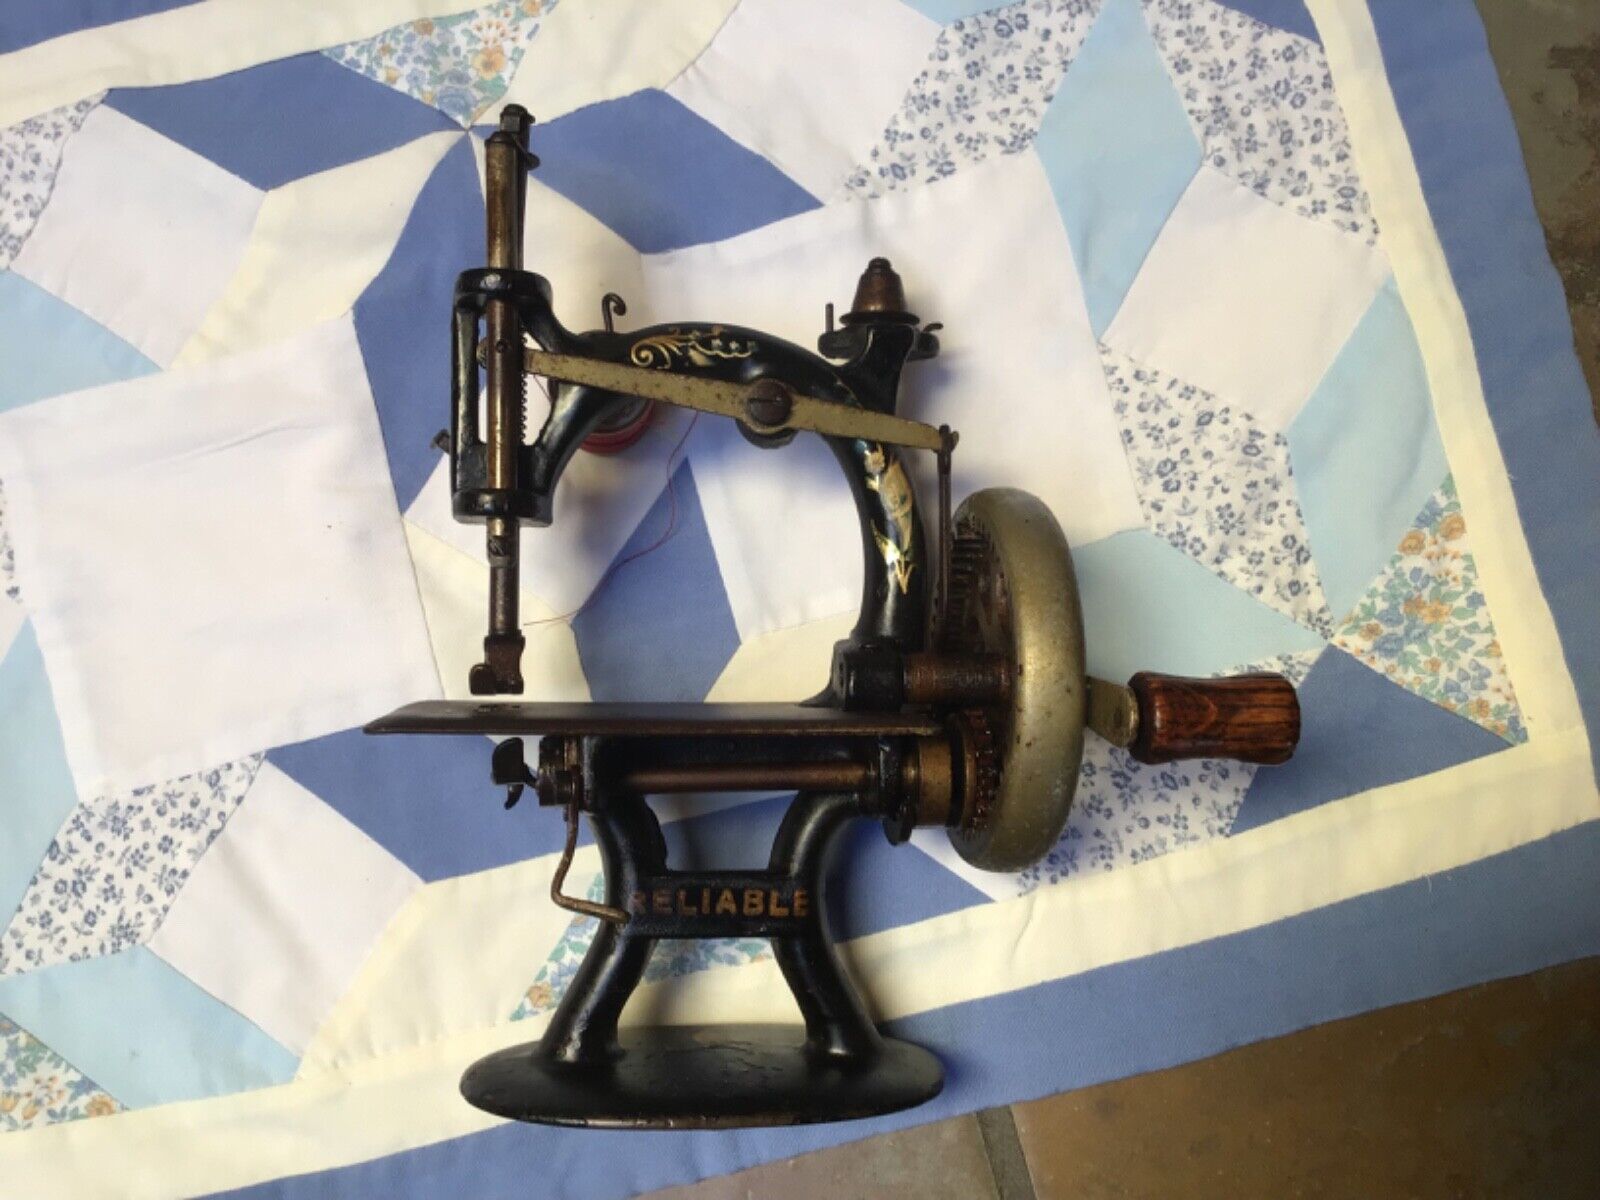 Foley & Williams Reliable Toy Child’s Sewing Machine